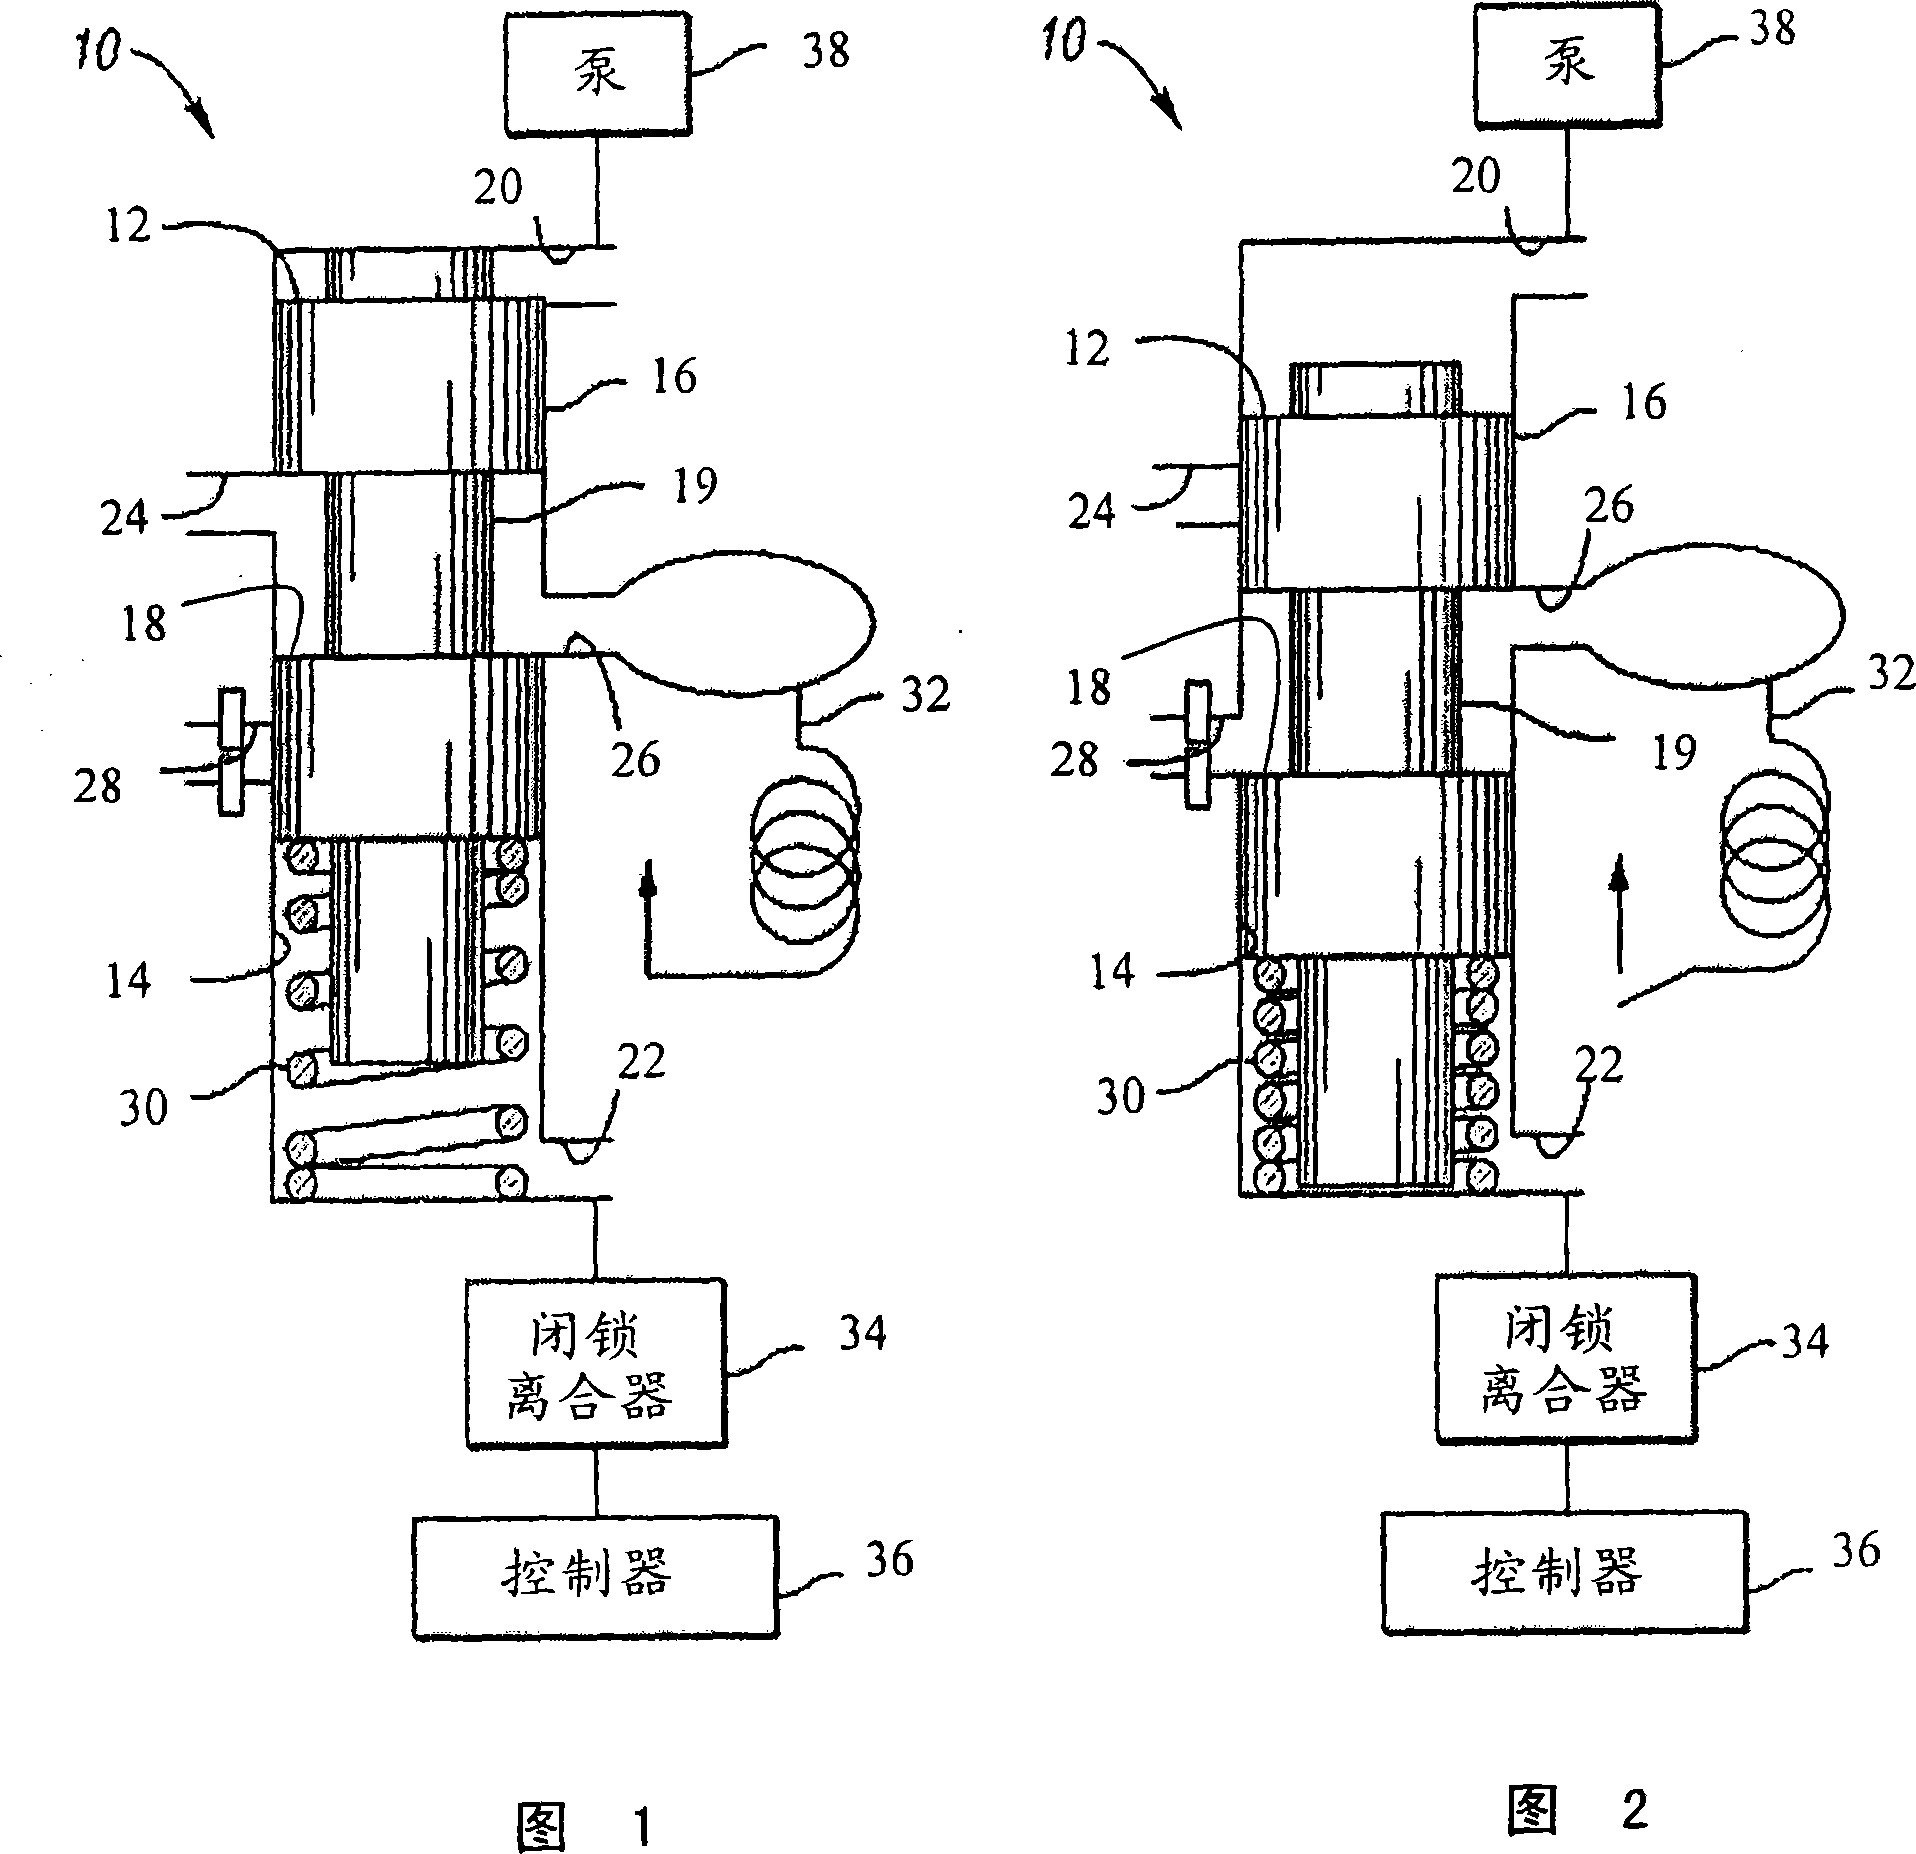 Method for controlling a filter maintenance indicator